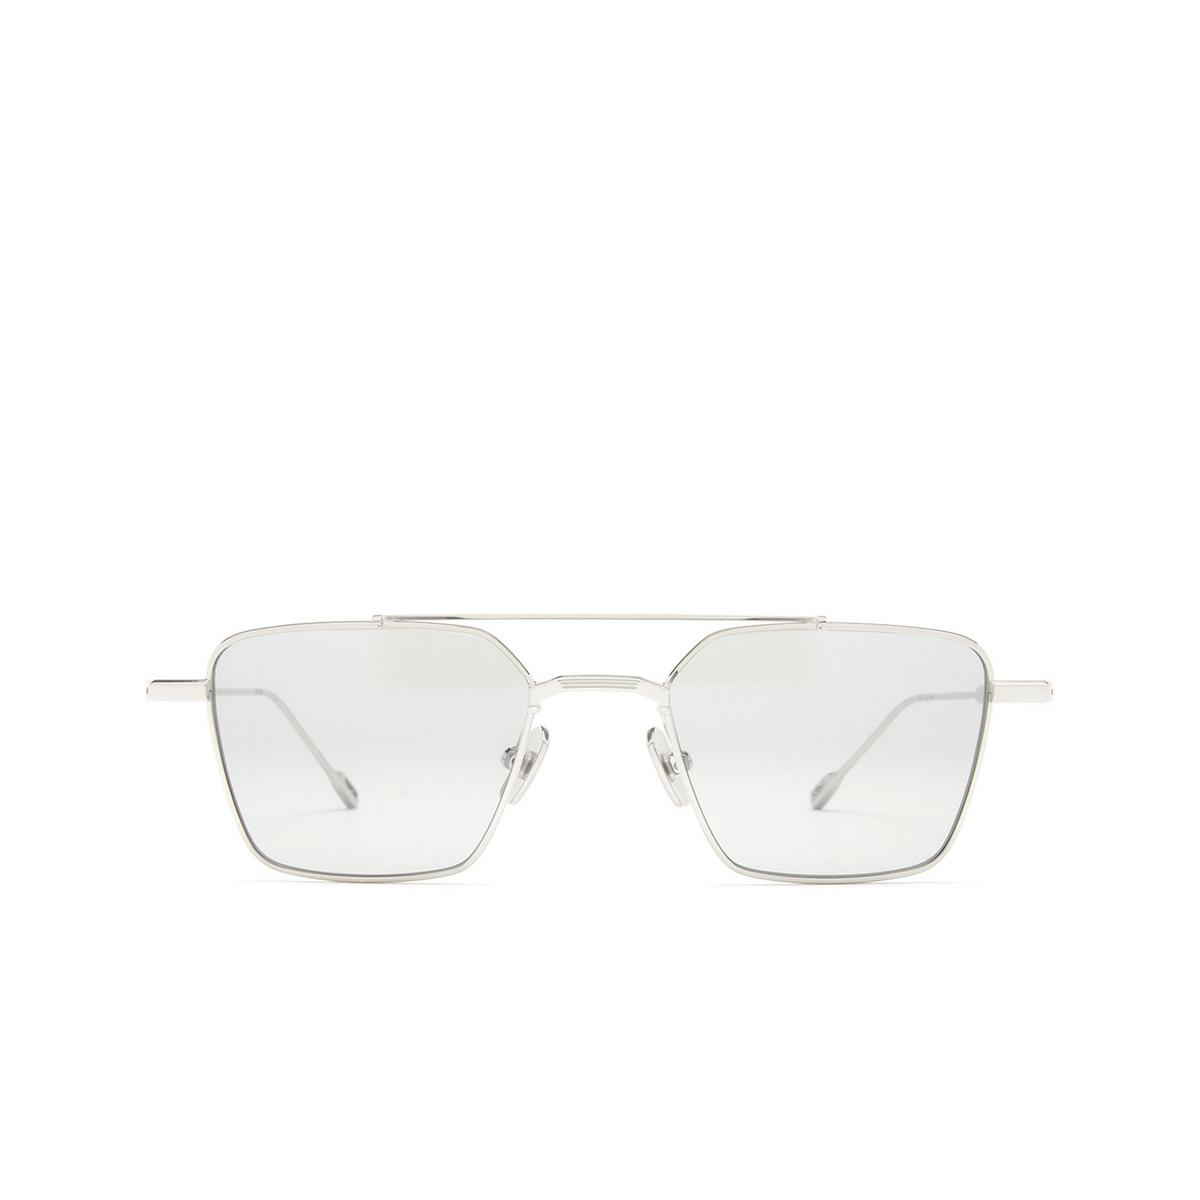 Native Sons® Irregular Sunglasses: Yeager Exp color Silver - front view